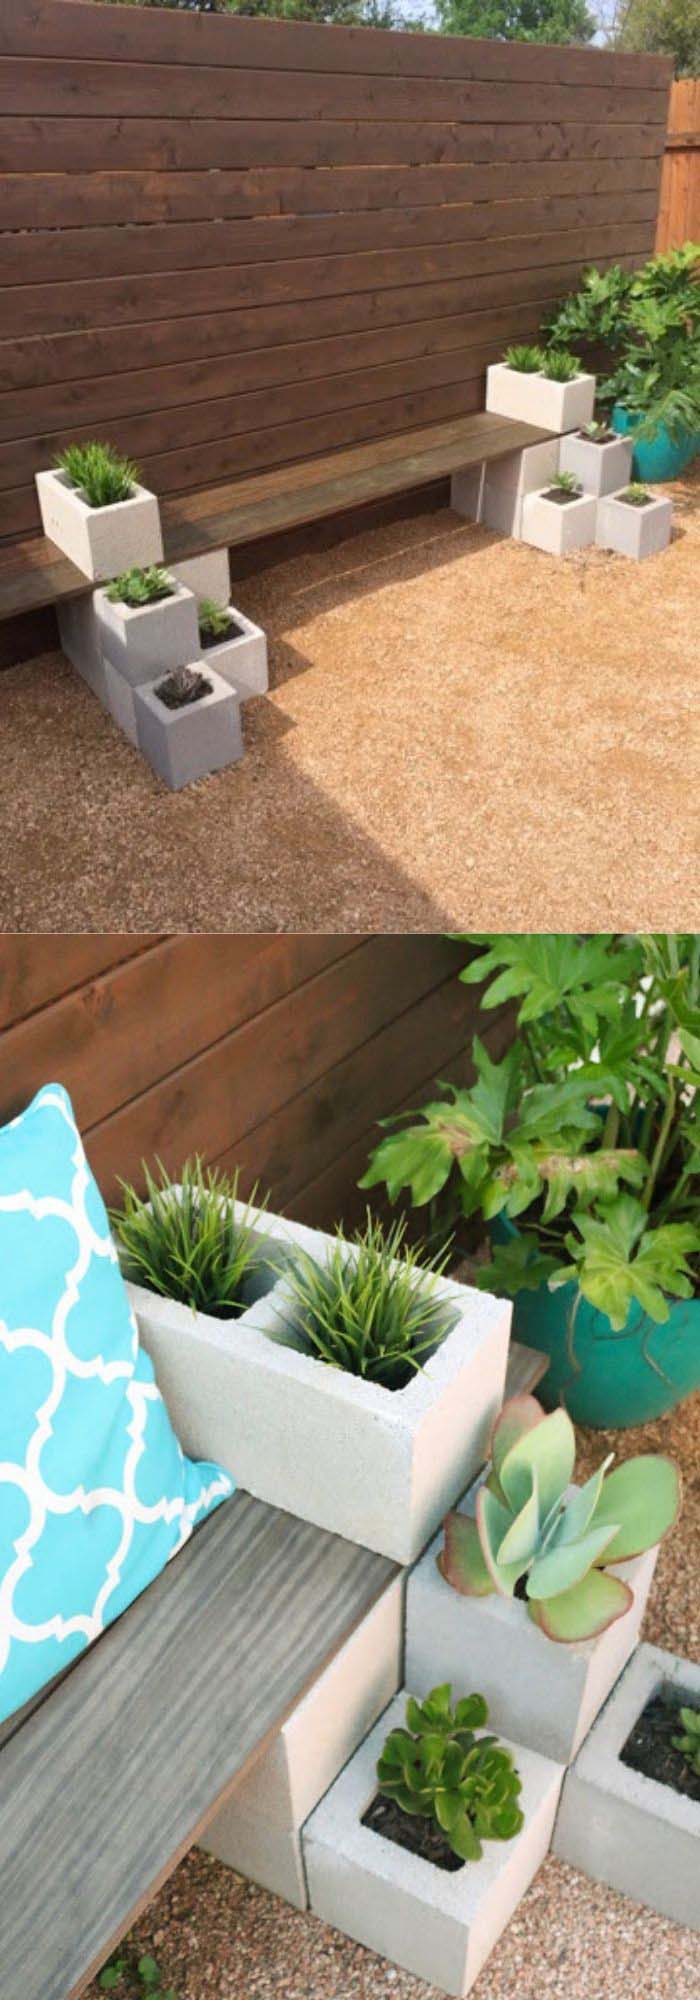 Simple Cinder Block Bench With Planters